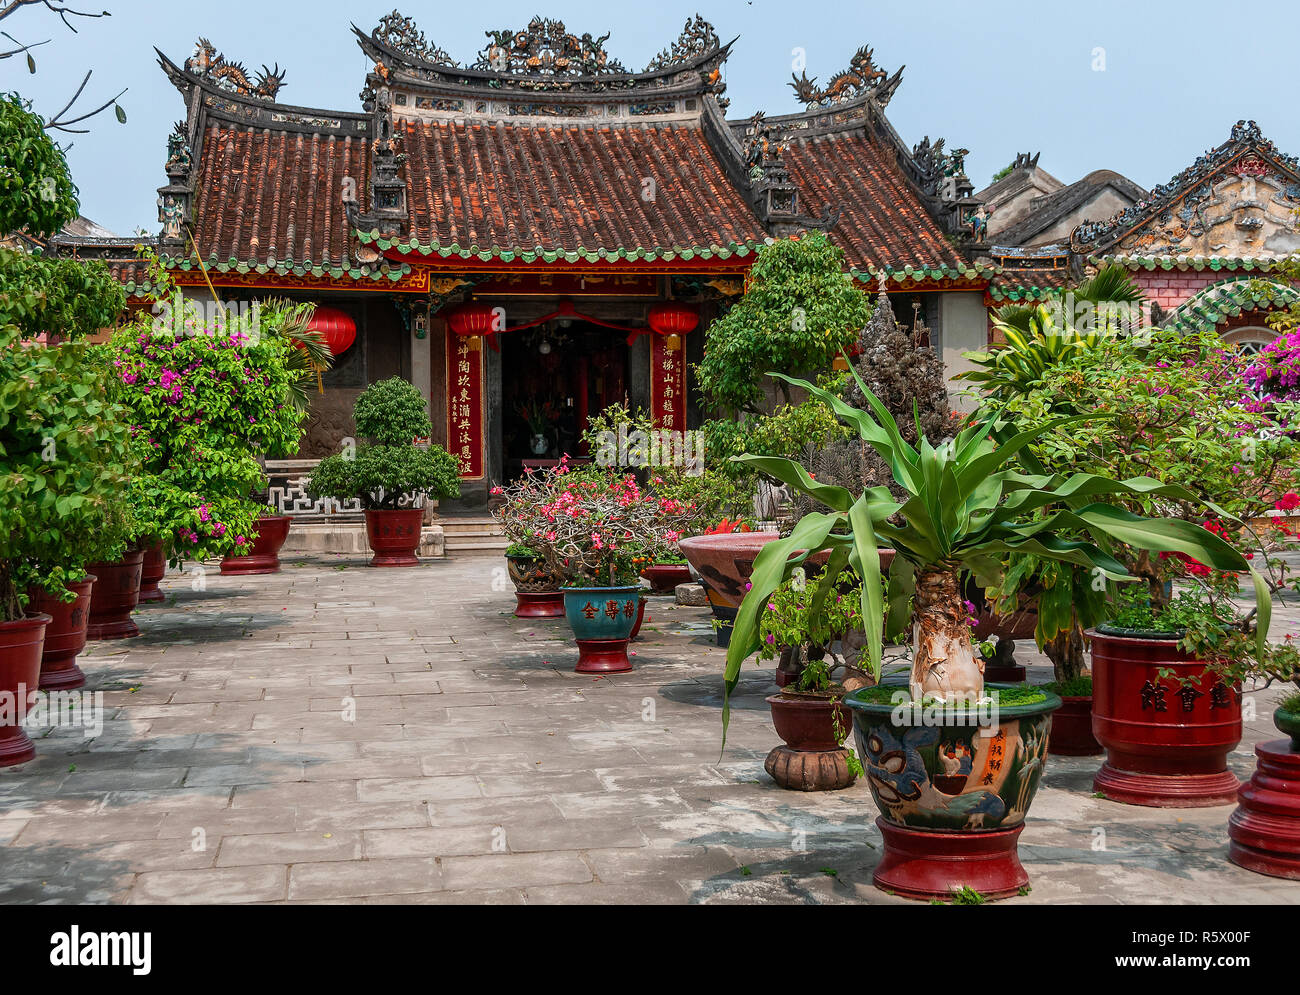 Quang Trieu Assembly Hall also known as Cantonese Assembly Hall with many pot plants in the courtyard - Hoi An, Vietnam Stock Photo